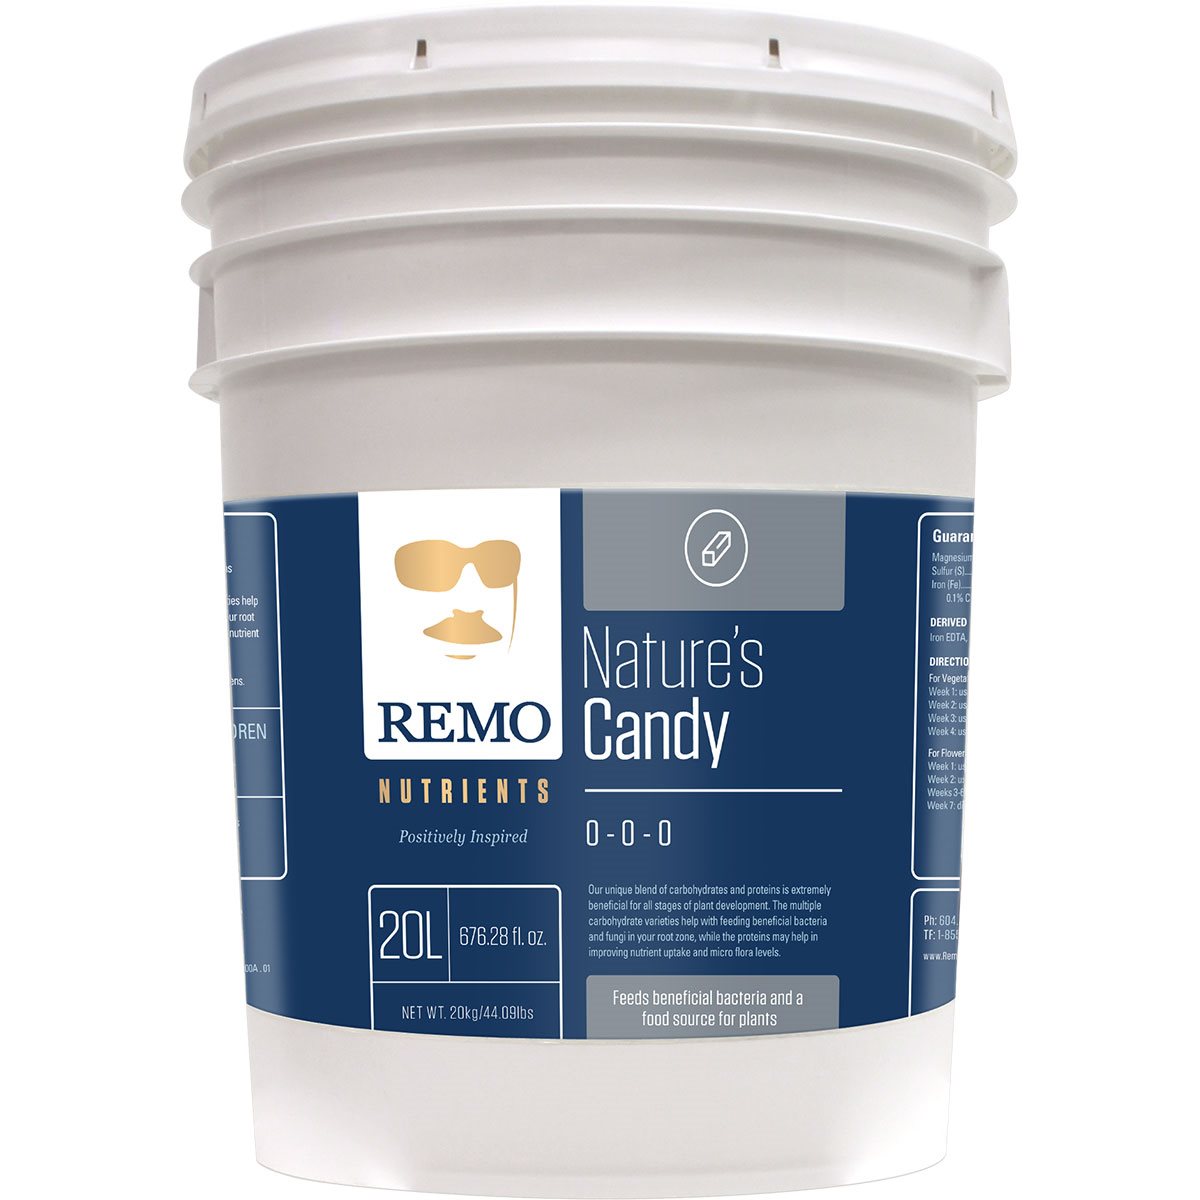 Remo Nature’s Candy 20 Liter